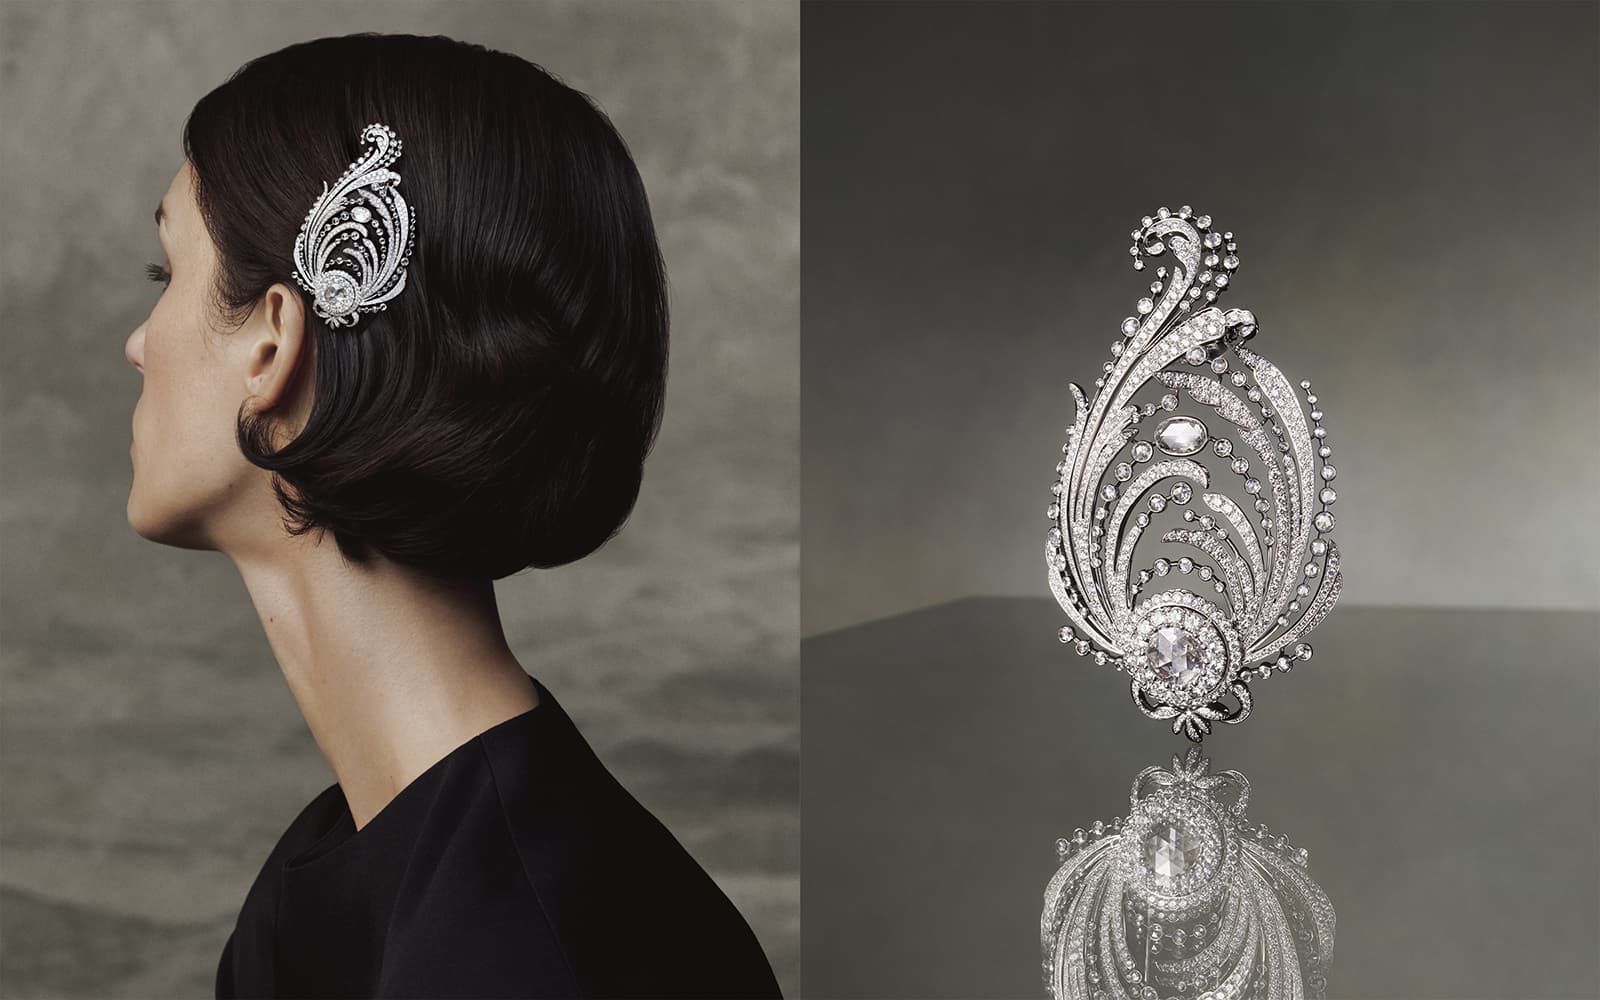 Boucheron New Sarpech hair jewel set with a rose cut diamond of 1.27 carats and a rose-cut diamond of 0.68 carats in white gold from the Histoire de Style New Maharajahs High Jewellery Collection